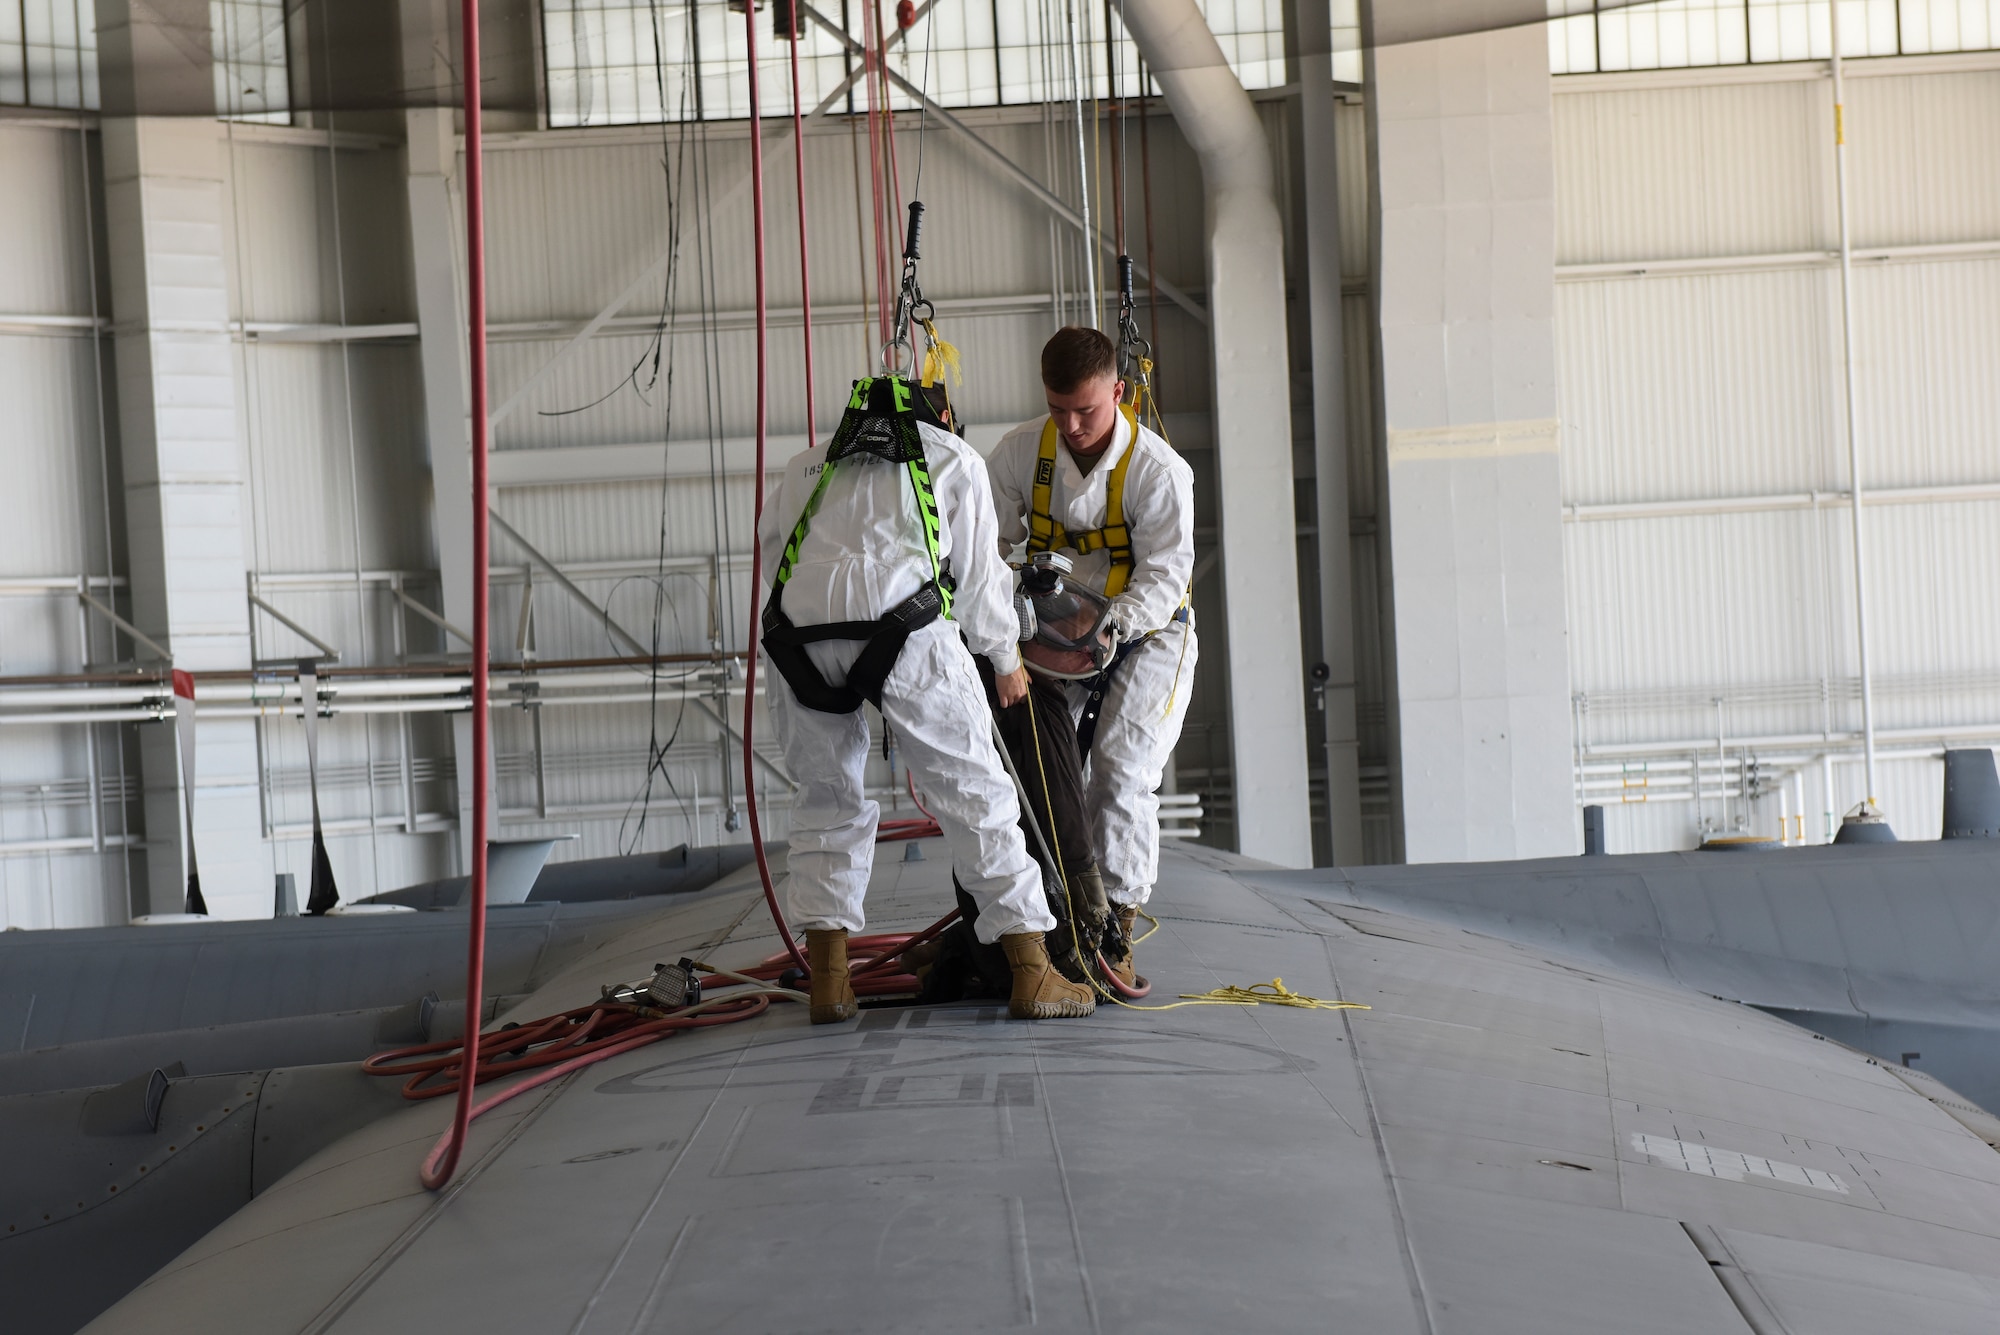 Airman from the 189th Maitenance Group participated in emergency fules training August 13, 2022.